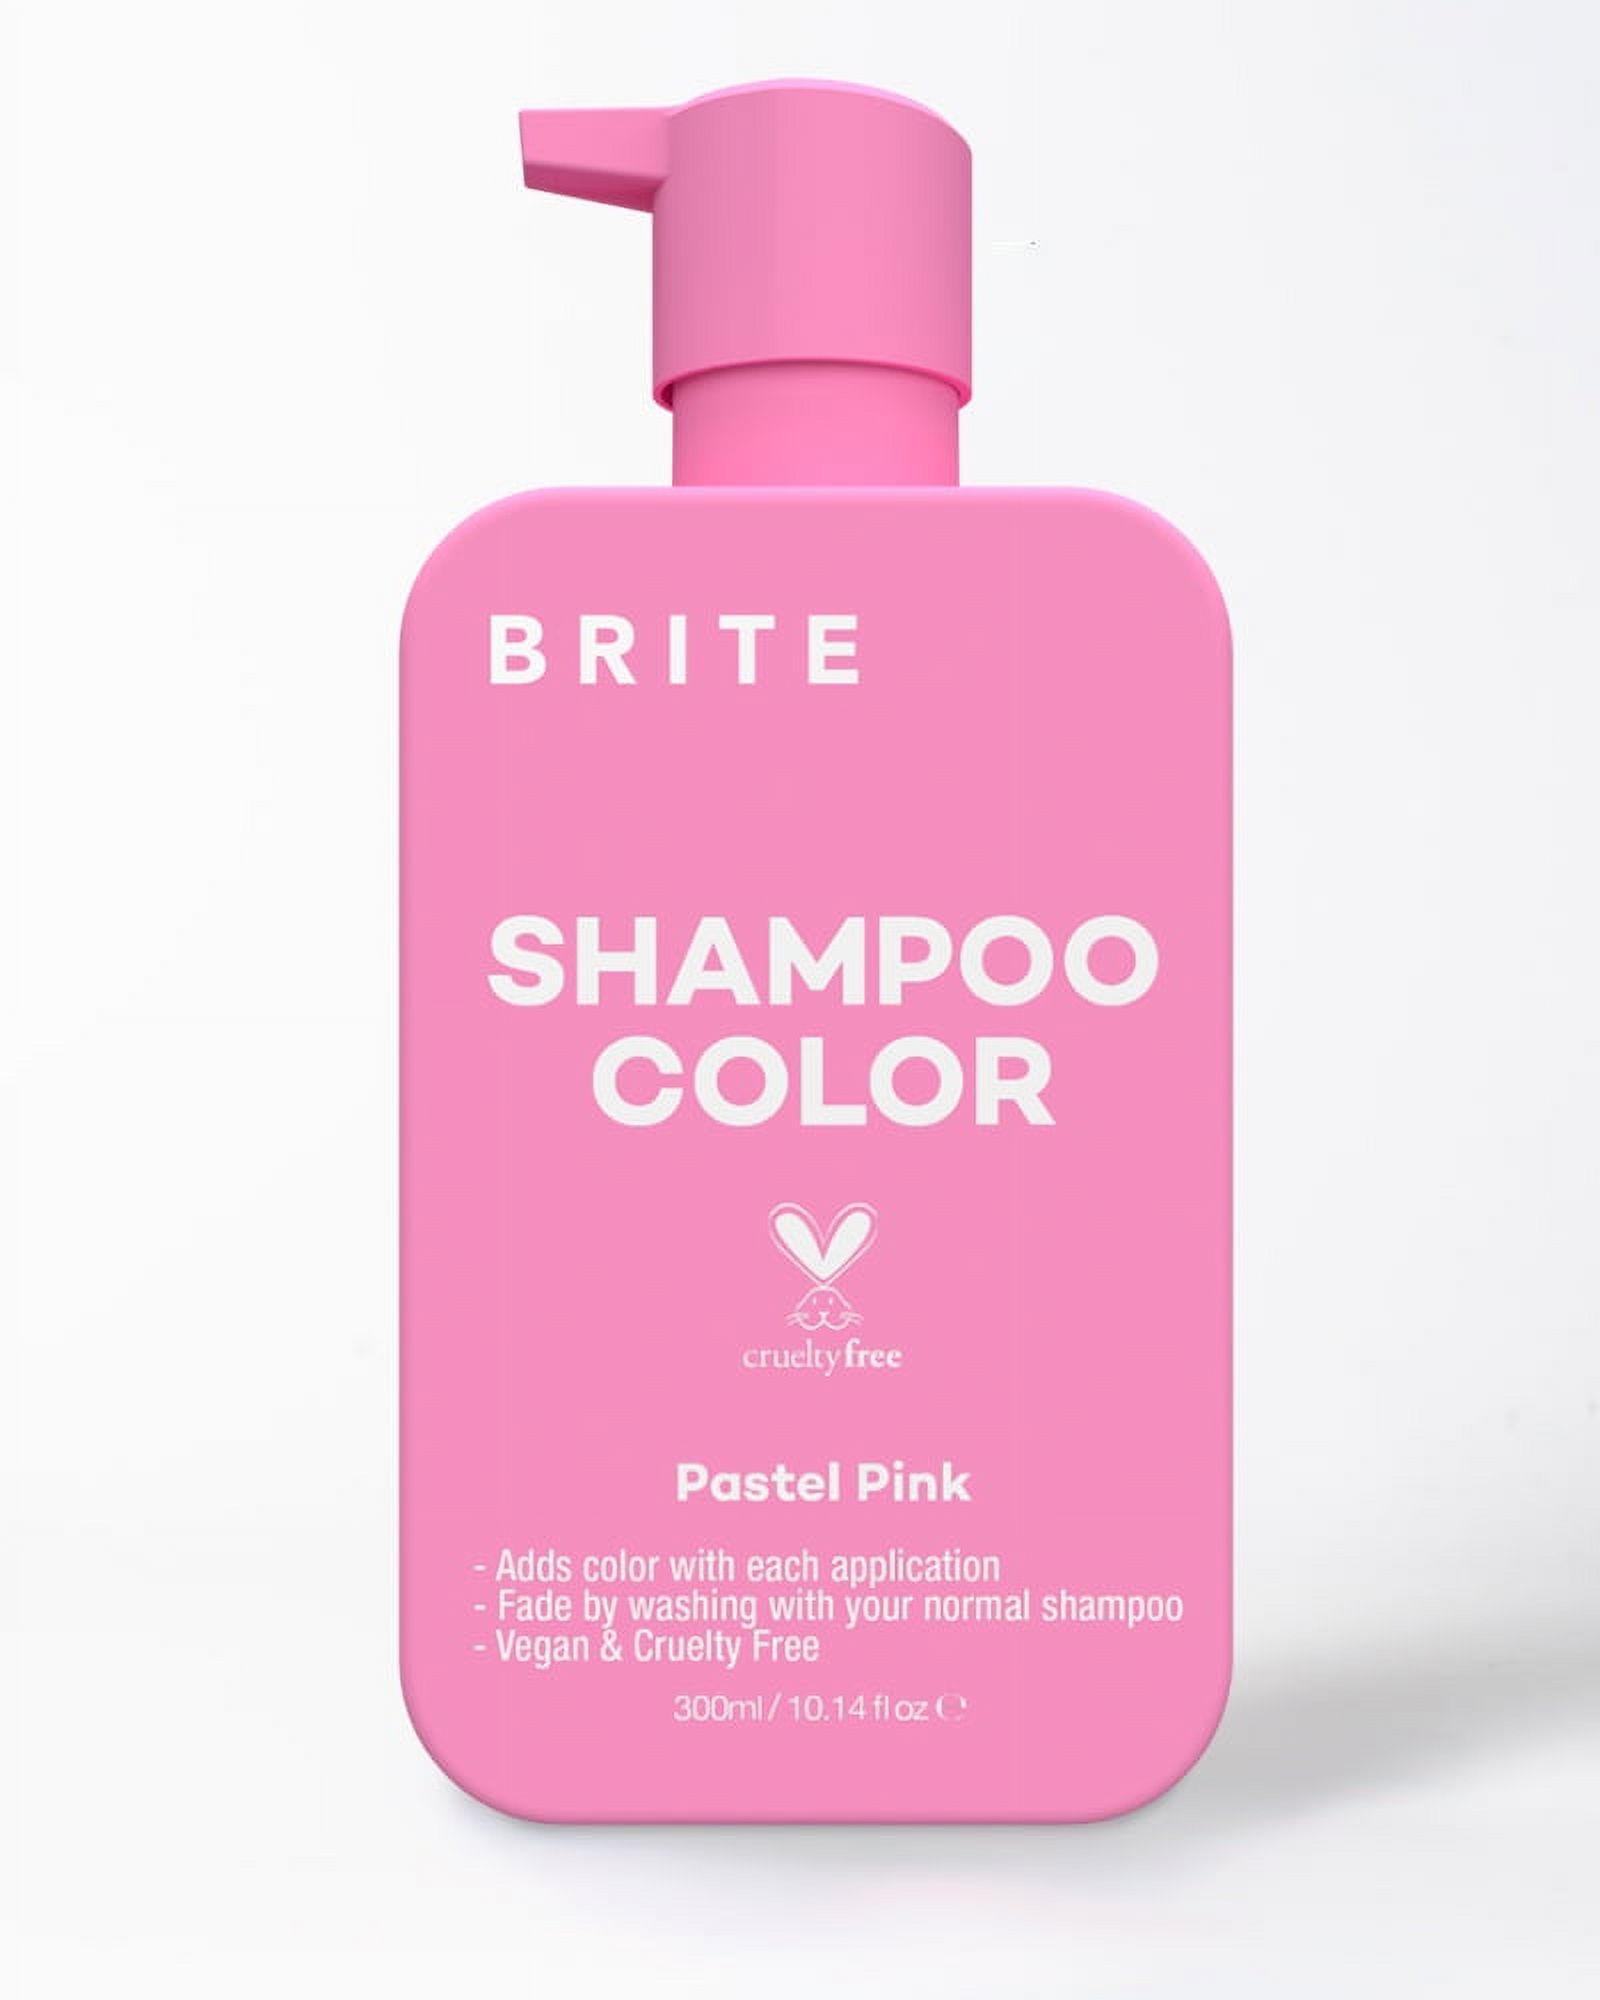 BRITE Color Shampoo Pastel Pink for Light Blonde, Highighted or Gray Hair, Vegan, Cruelty Free, Color Building, 10.14 fl oz - image 1 of 6